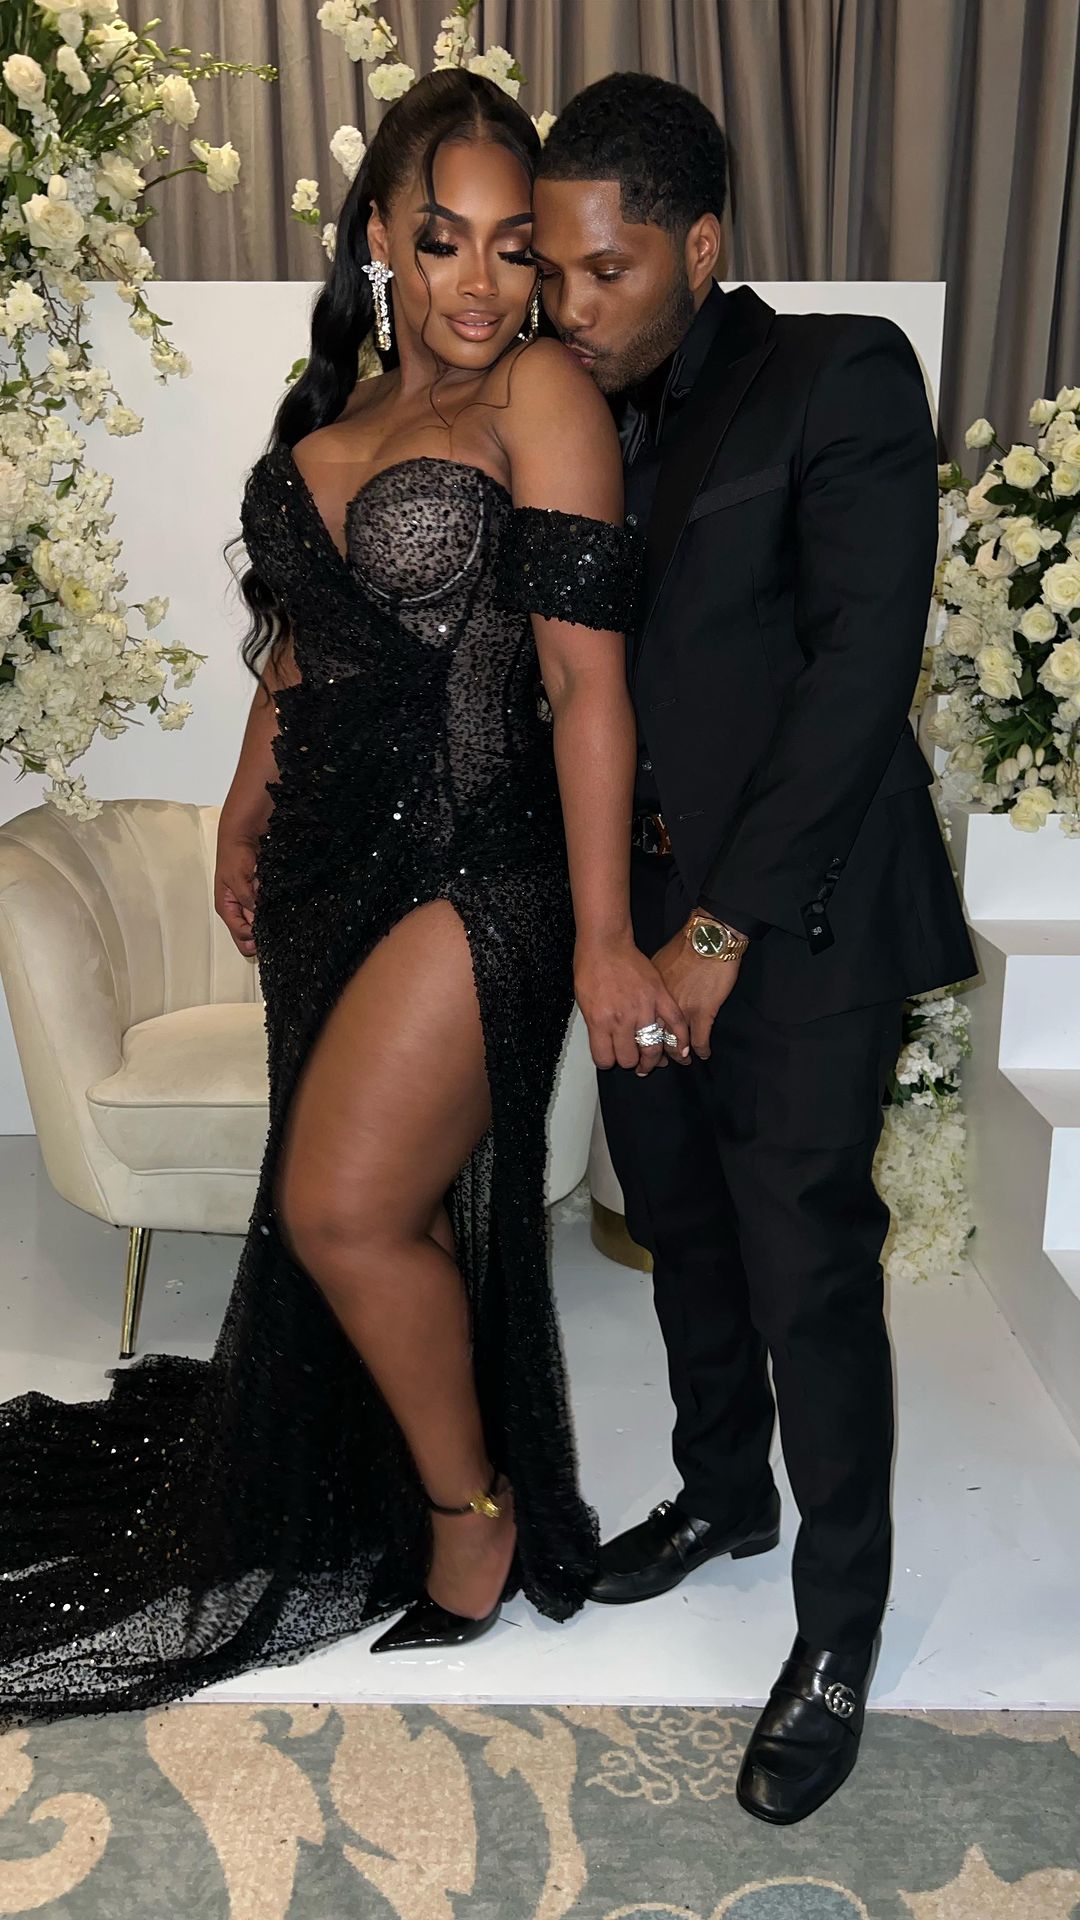 Fashion Bomb Weddings Porsha Williams and Simon Guobadia Celebrated Their Union in a Magical Two Part Ceremony with a Stylish Guest List7